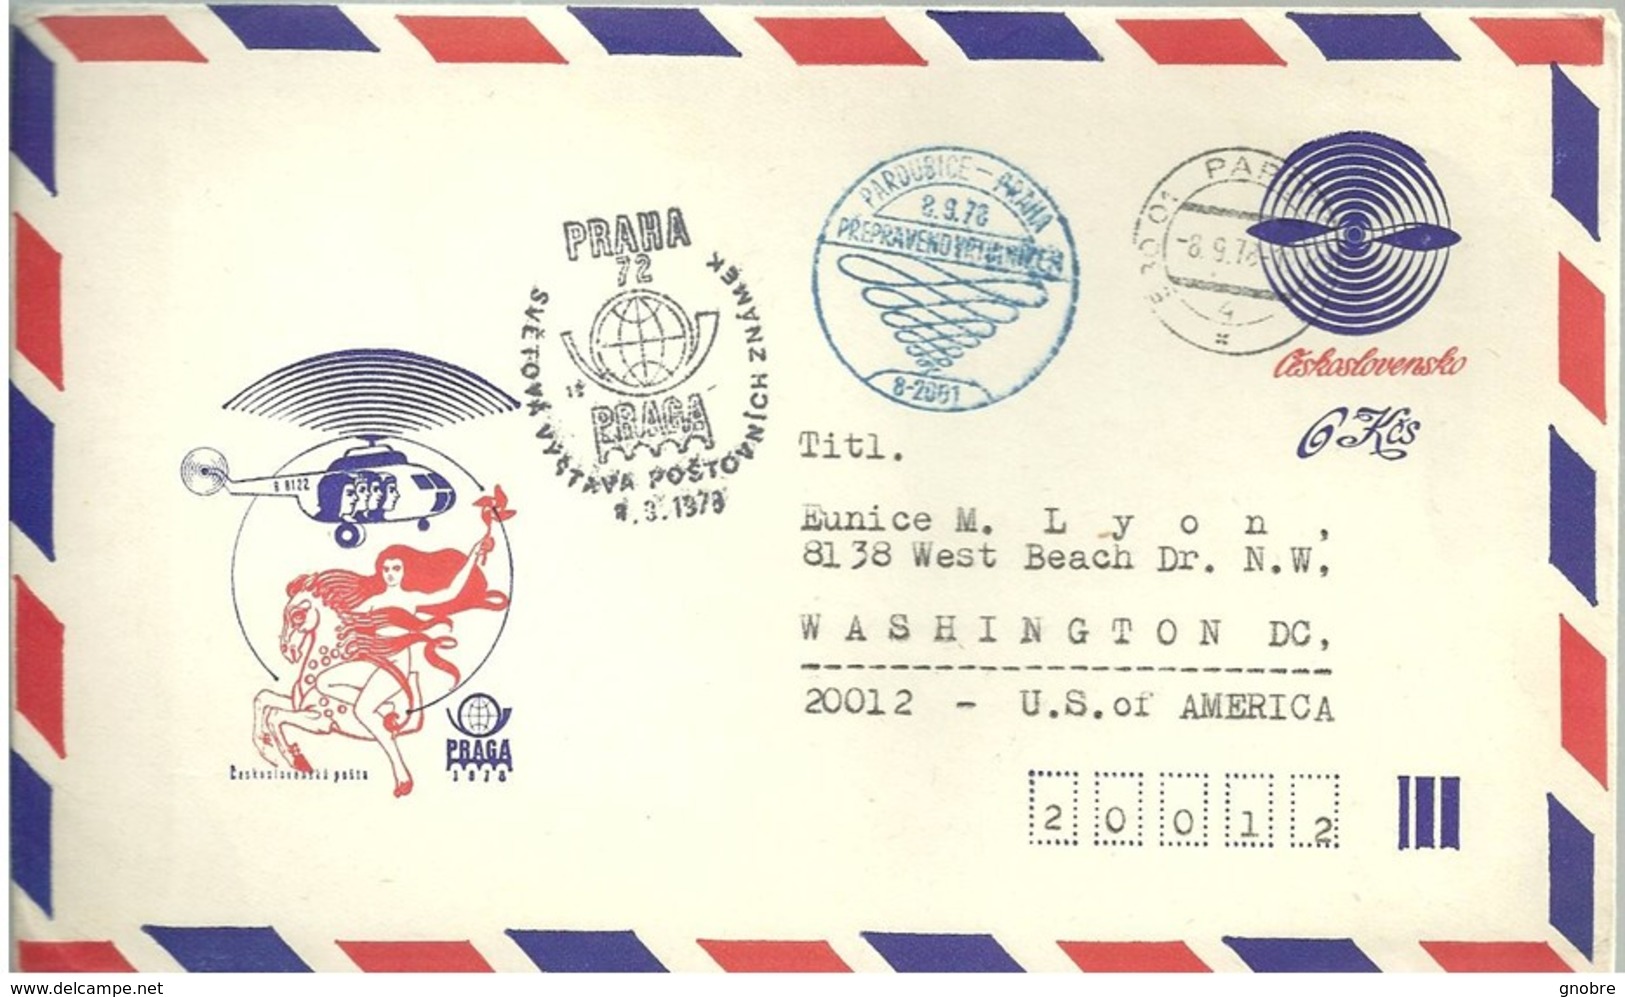 CZECHOSLOVAKIA To USA Cover Prepaid Stationery Sent In 1978 - Great Cancel - Woman Helicopter (GN 0278) - Buste